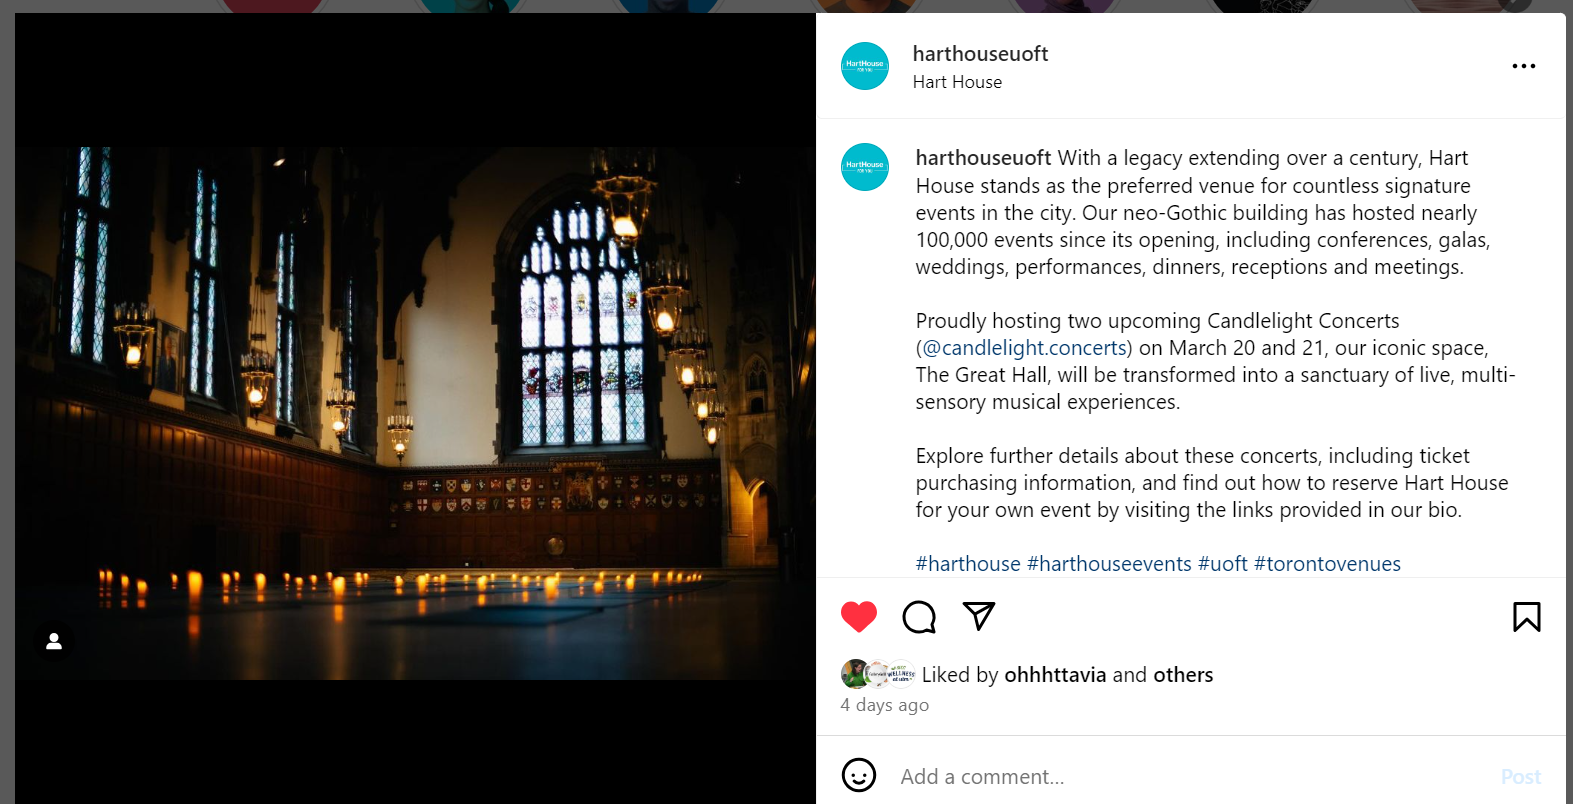 Great Hall of Hart House with a circle of candles - from the Hart House Instagram account